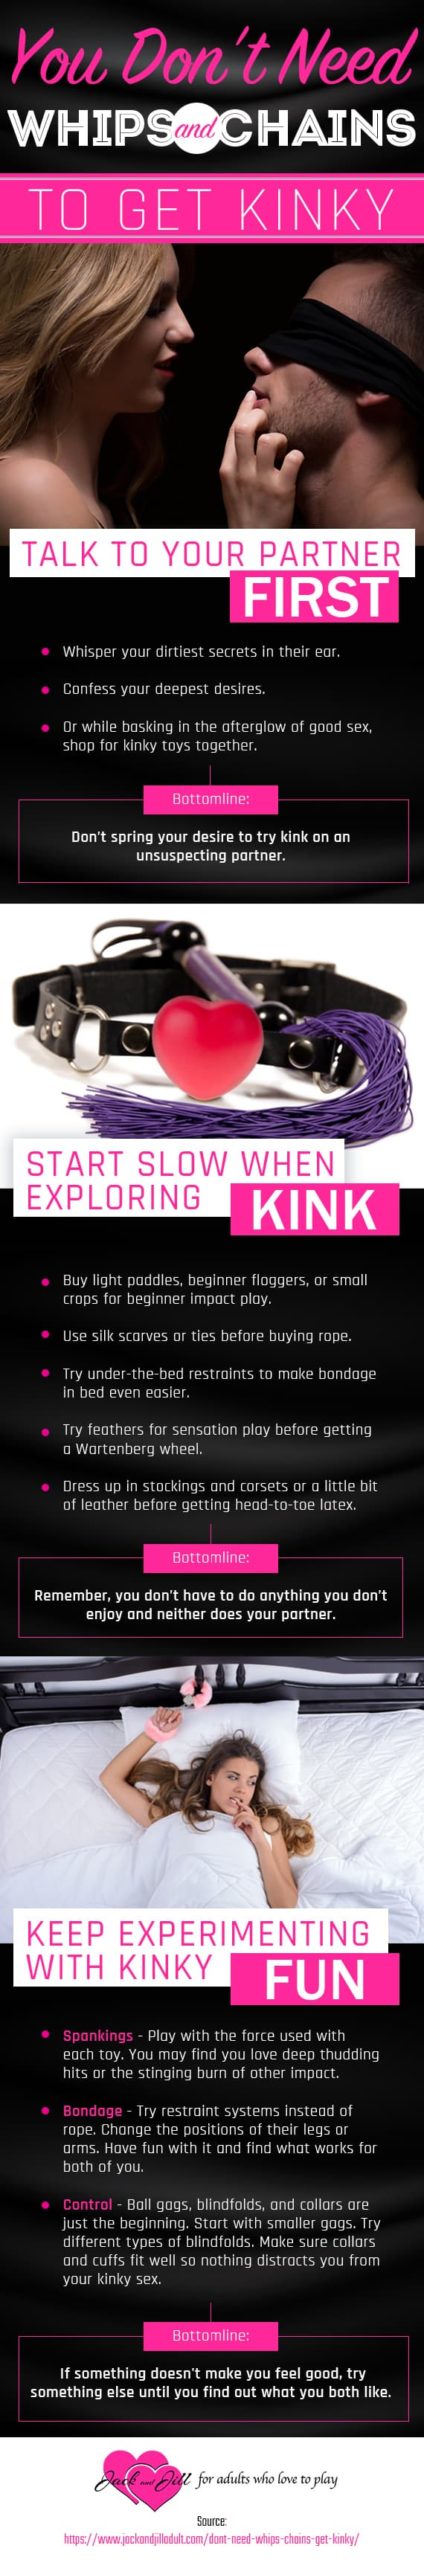 Infographic for You Don’t Need Whips and Chains to Get Kinky